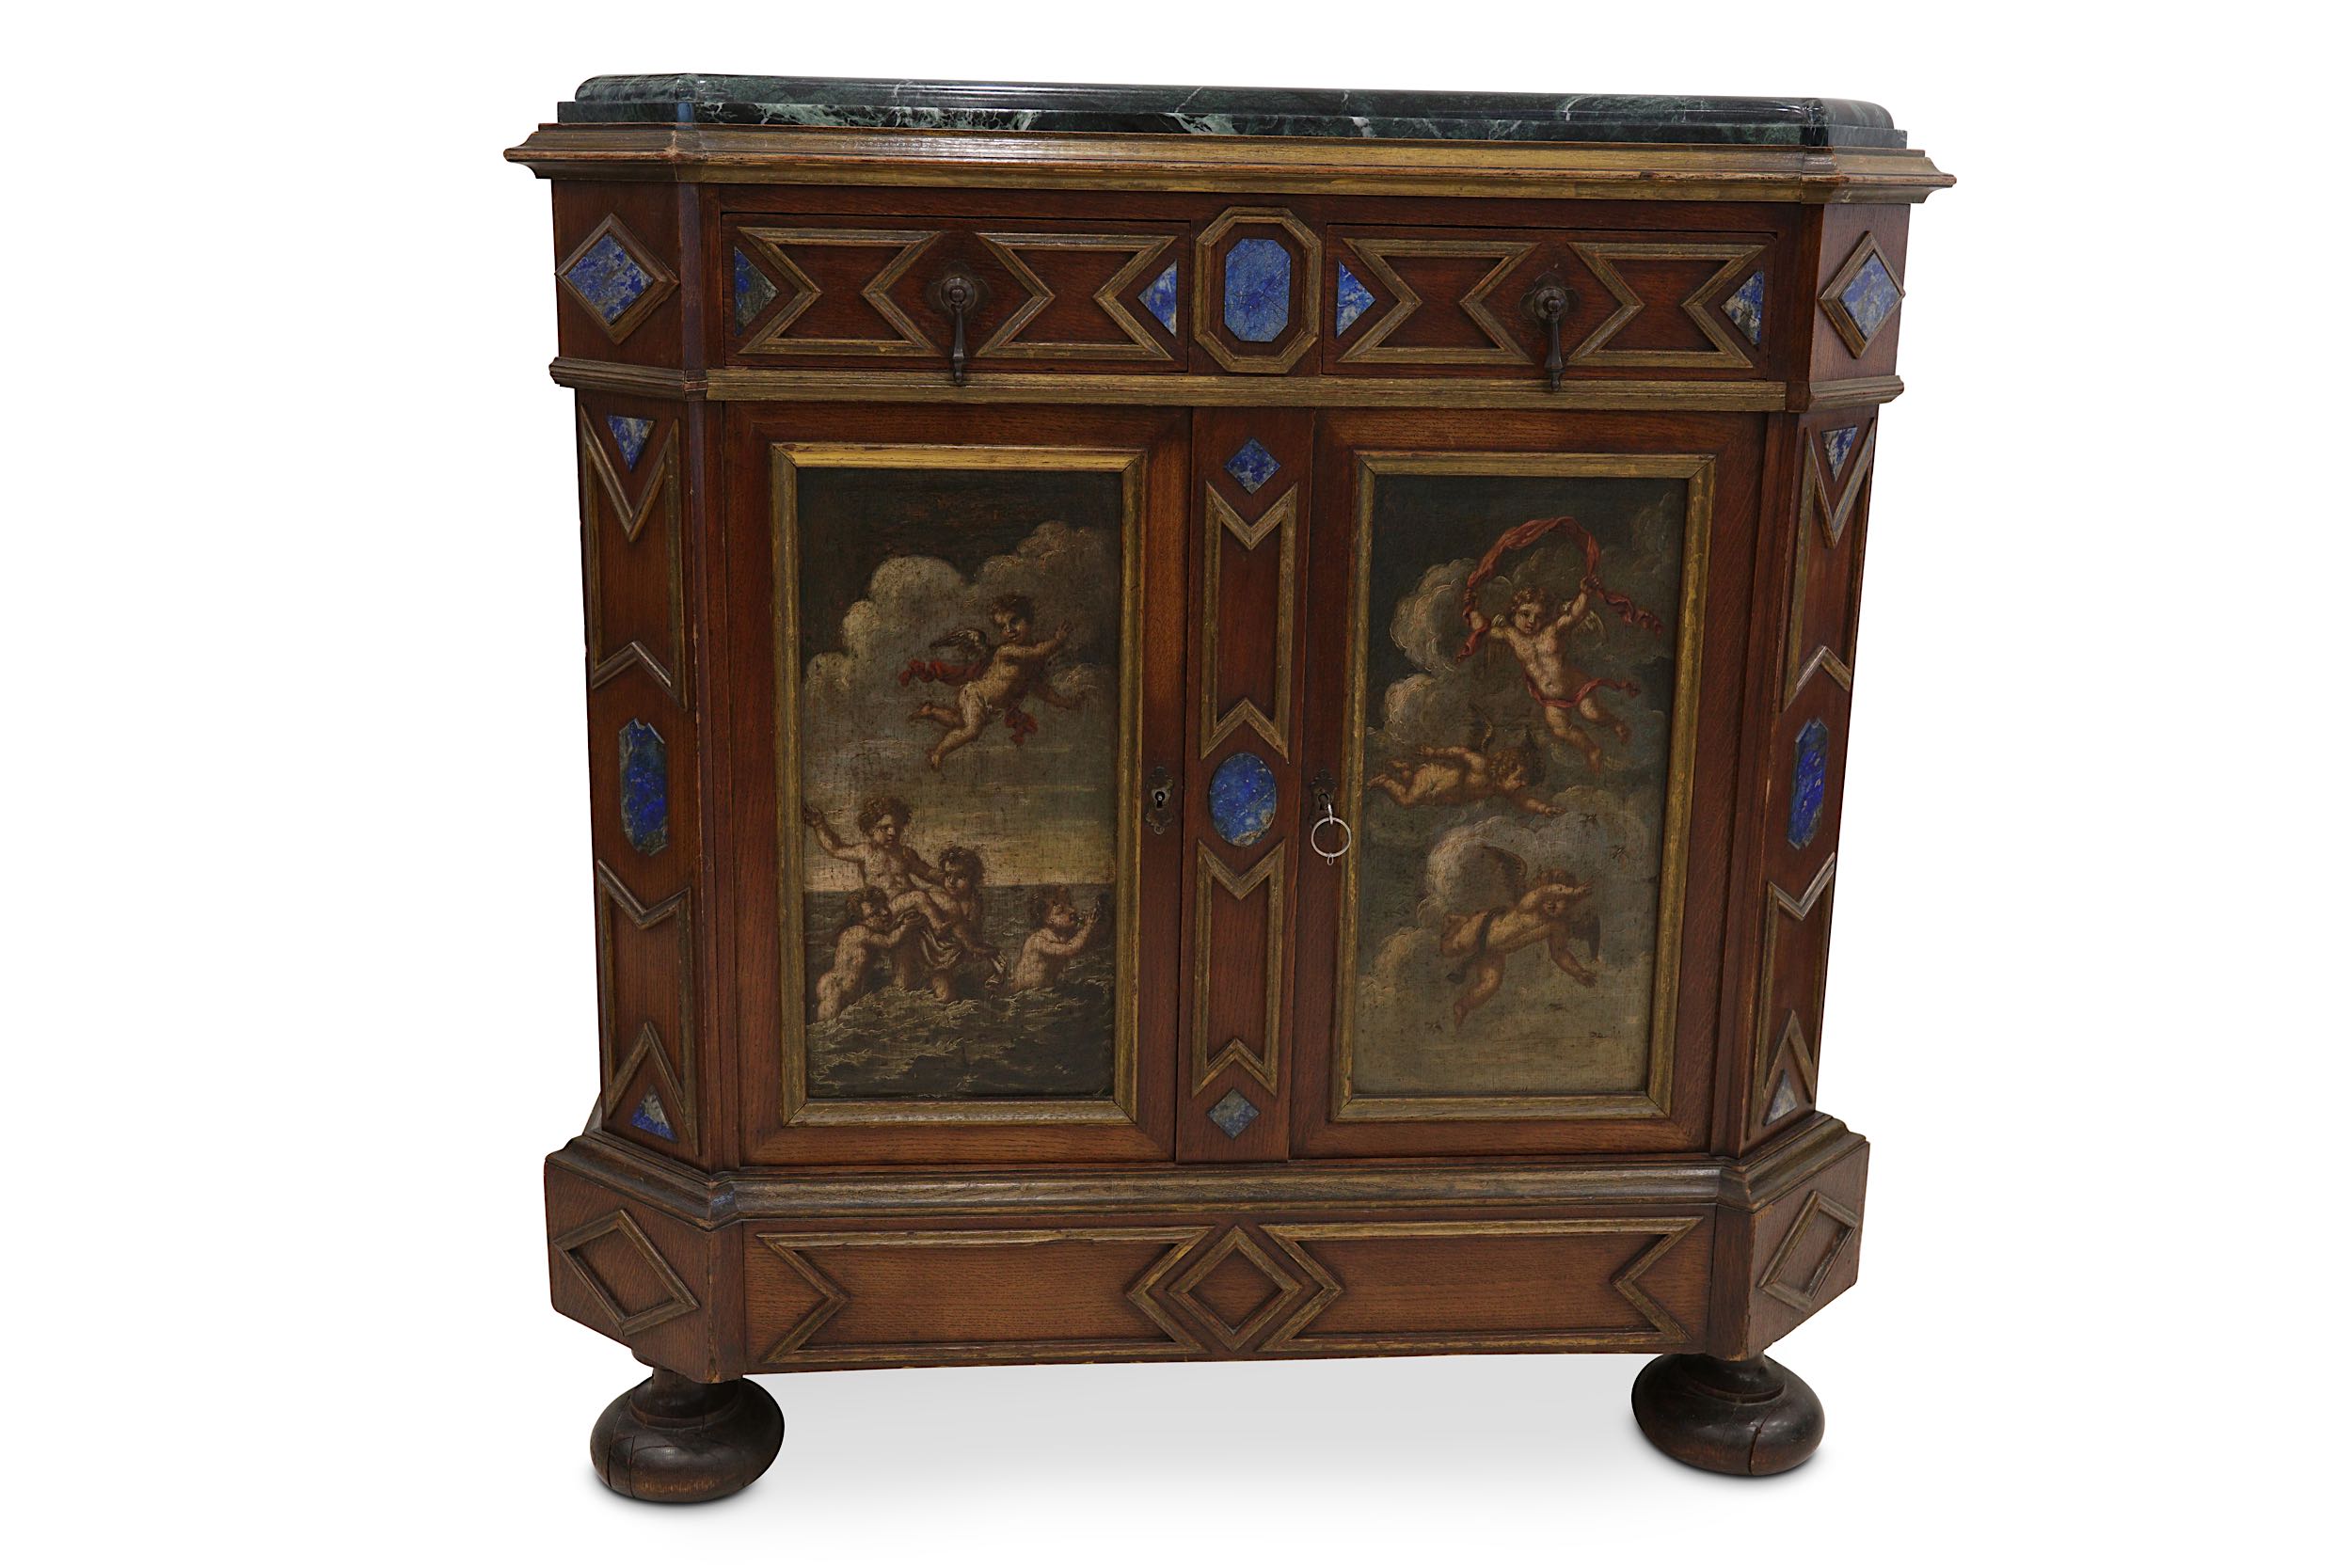 A FRENCH LAPIS-LAZULI MOUNTED, POLYCHROME DECORATED AND PARCEL GILT OAK MEUBLE D'APPUI.